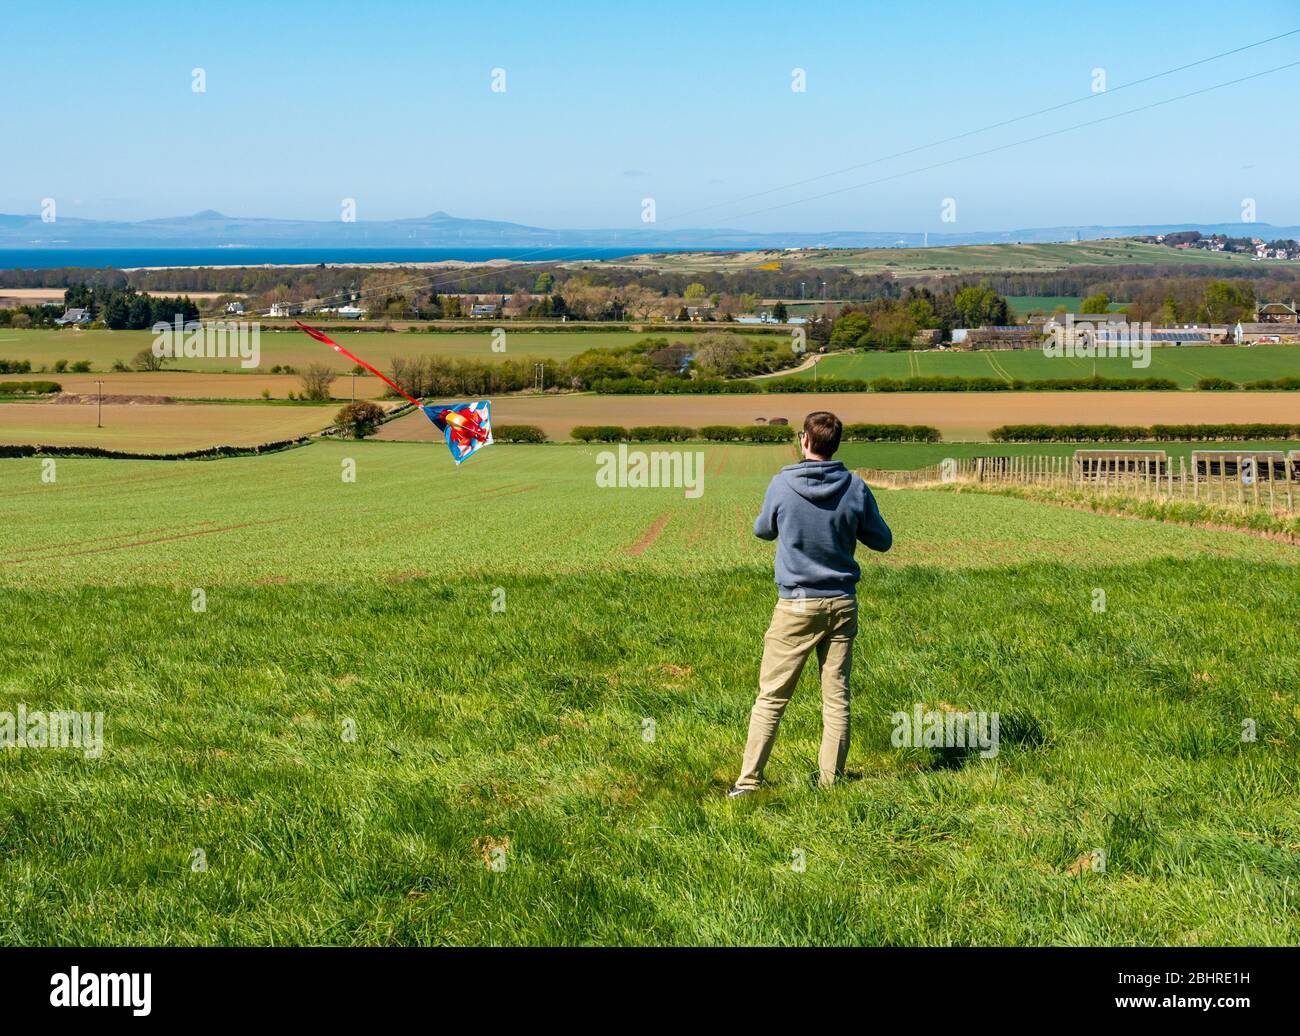 A man files a colourful kite on sunny day  with a view across the Firth of Forth to the twin peaks of Lomond Hills in Fife, East Lothian, Scotland, UK Stock Photo